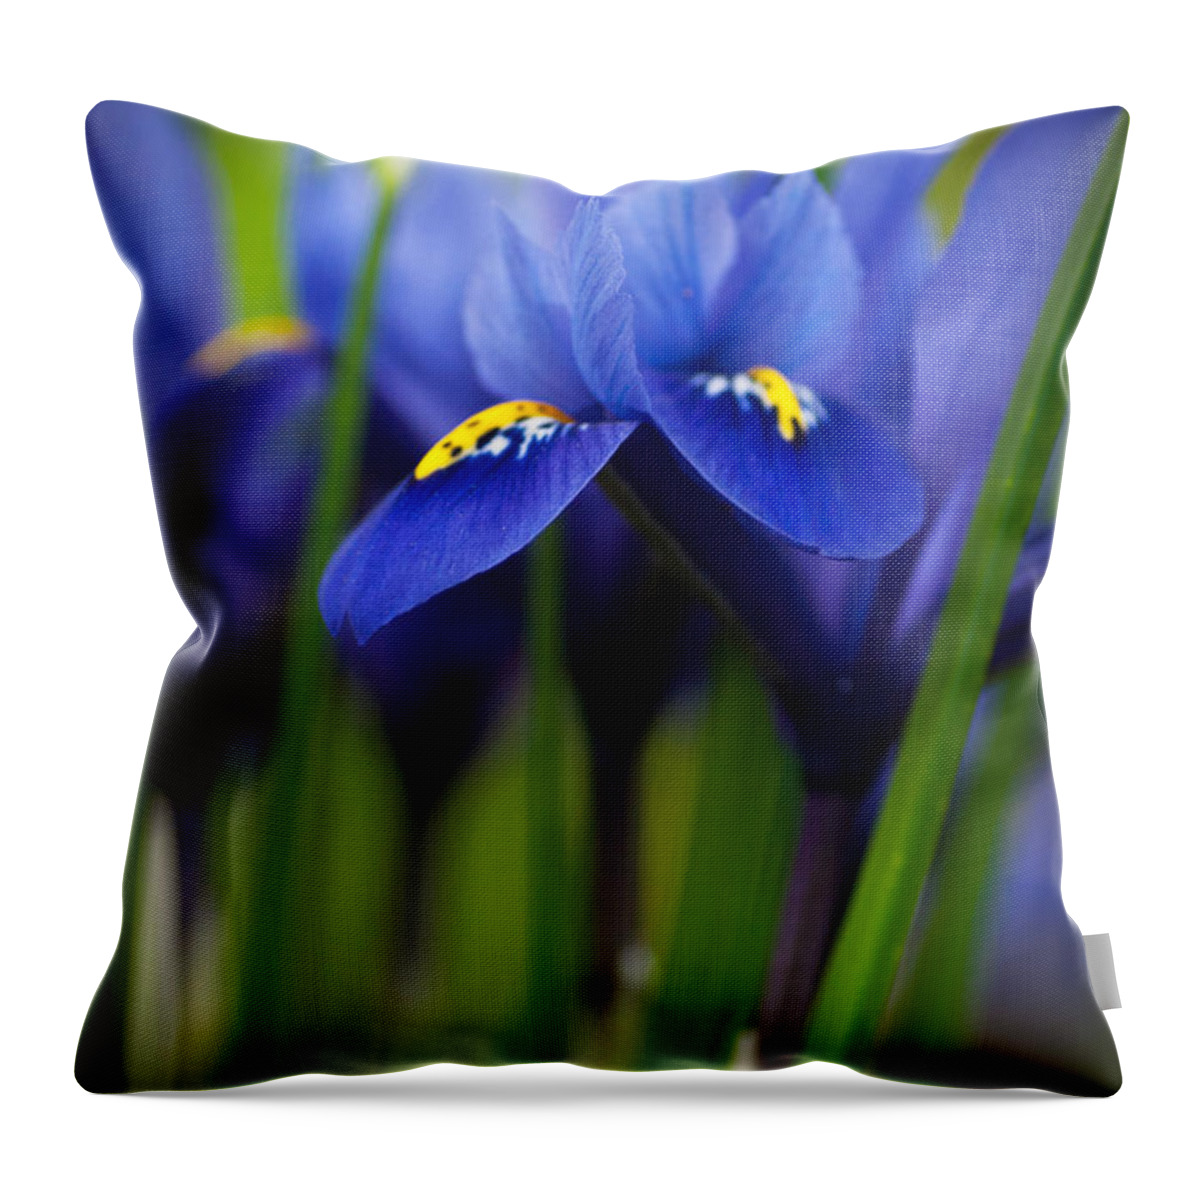 Purple Flowers Throw Pillow featuring the photograph Purple Flowers by Catherine Lau